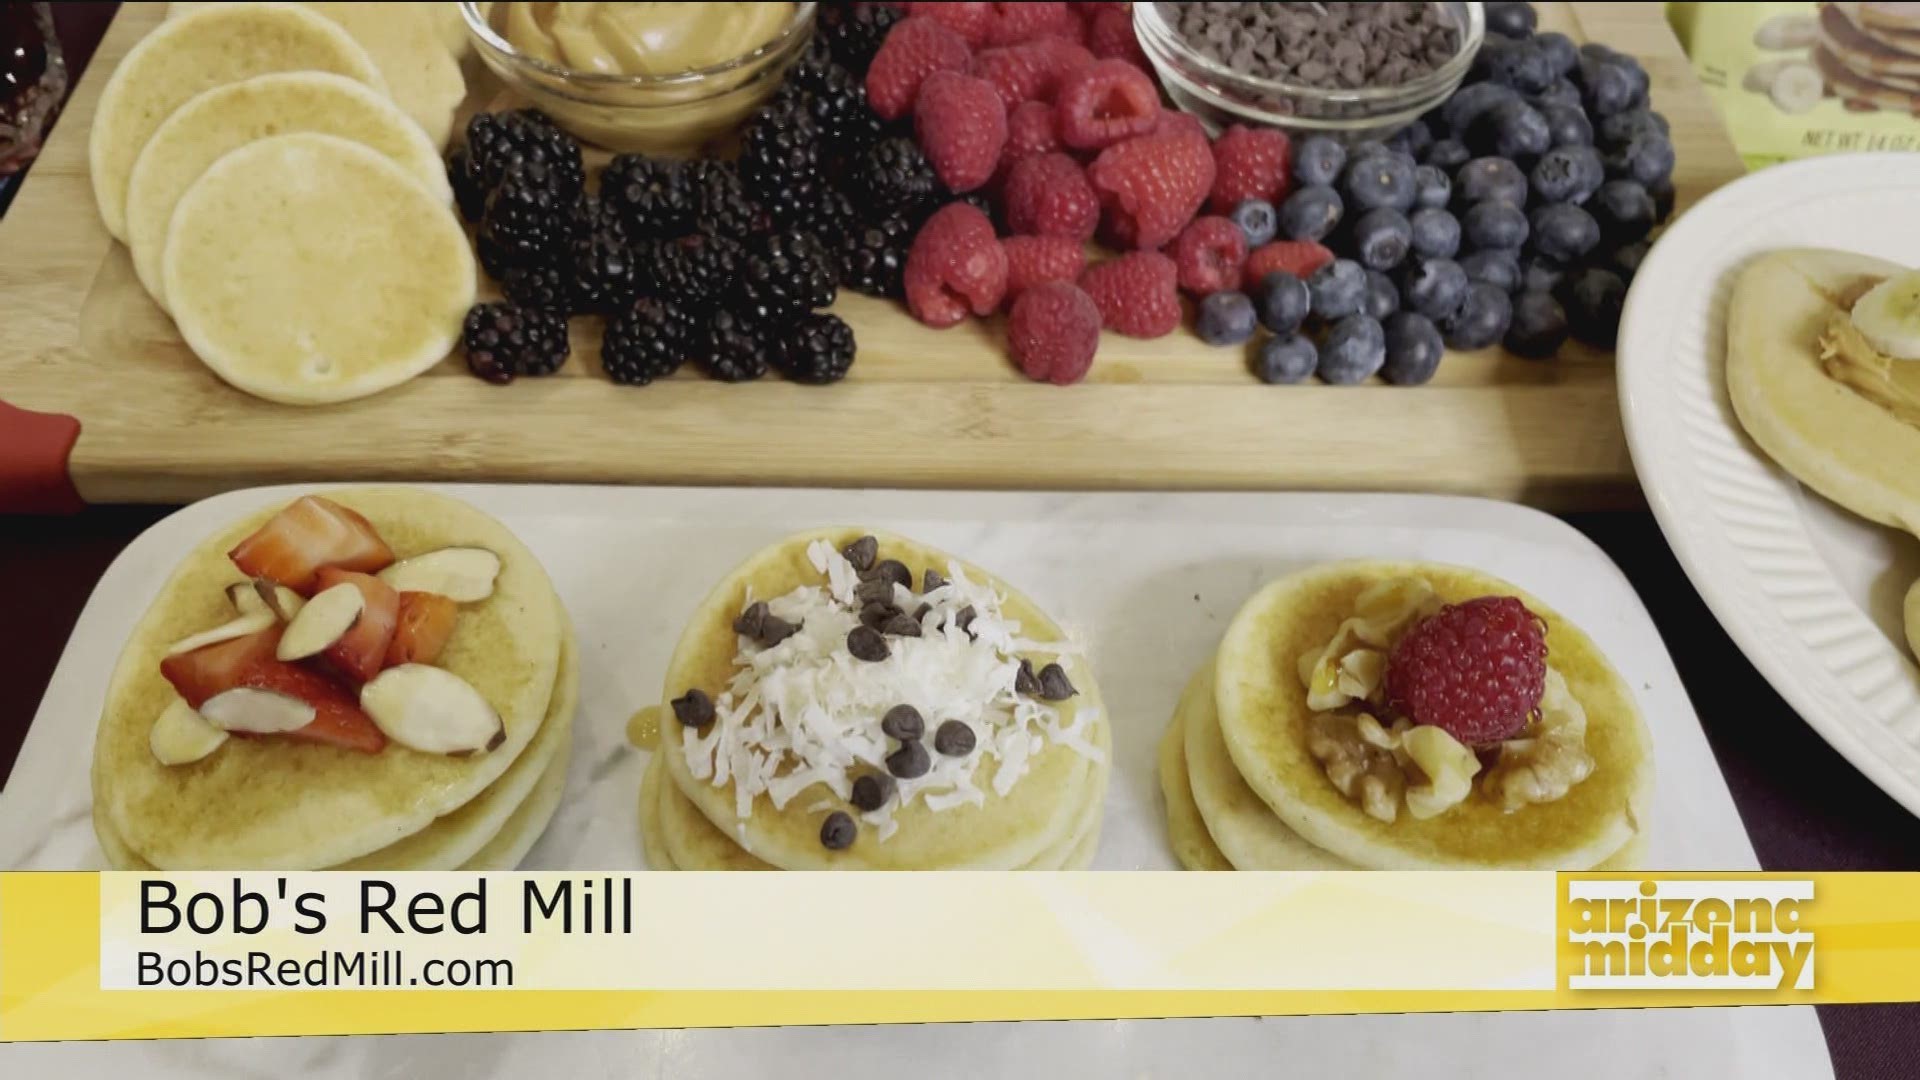 Gillean Barkyoumb, with Millennial Nutrition, shows us how to celebrate Hot Breakfast Month with pancakes from Bob's Red Mill